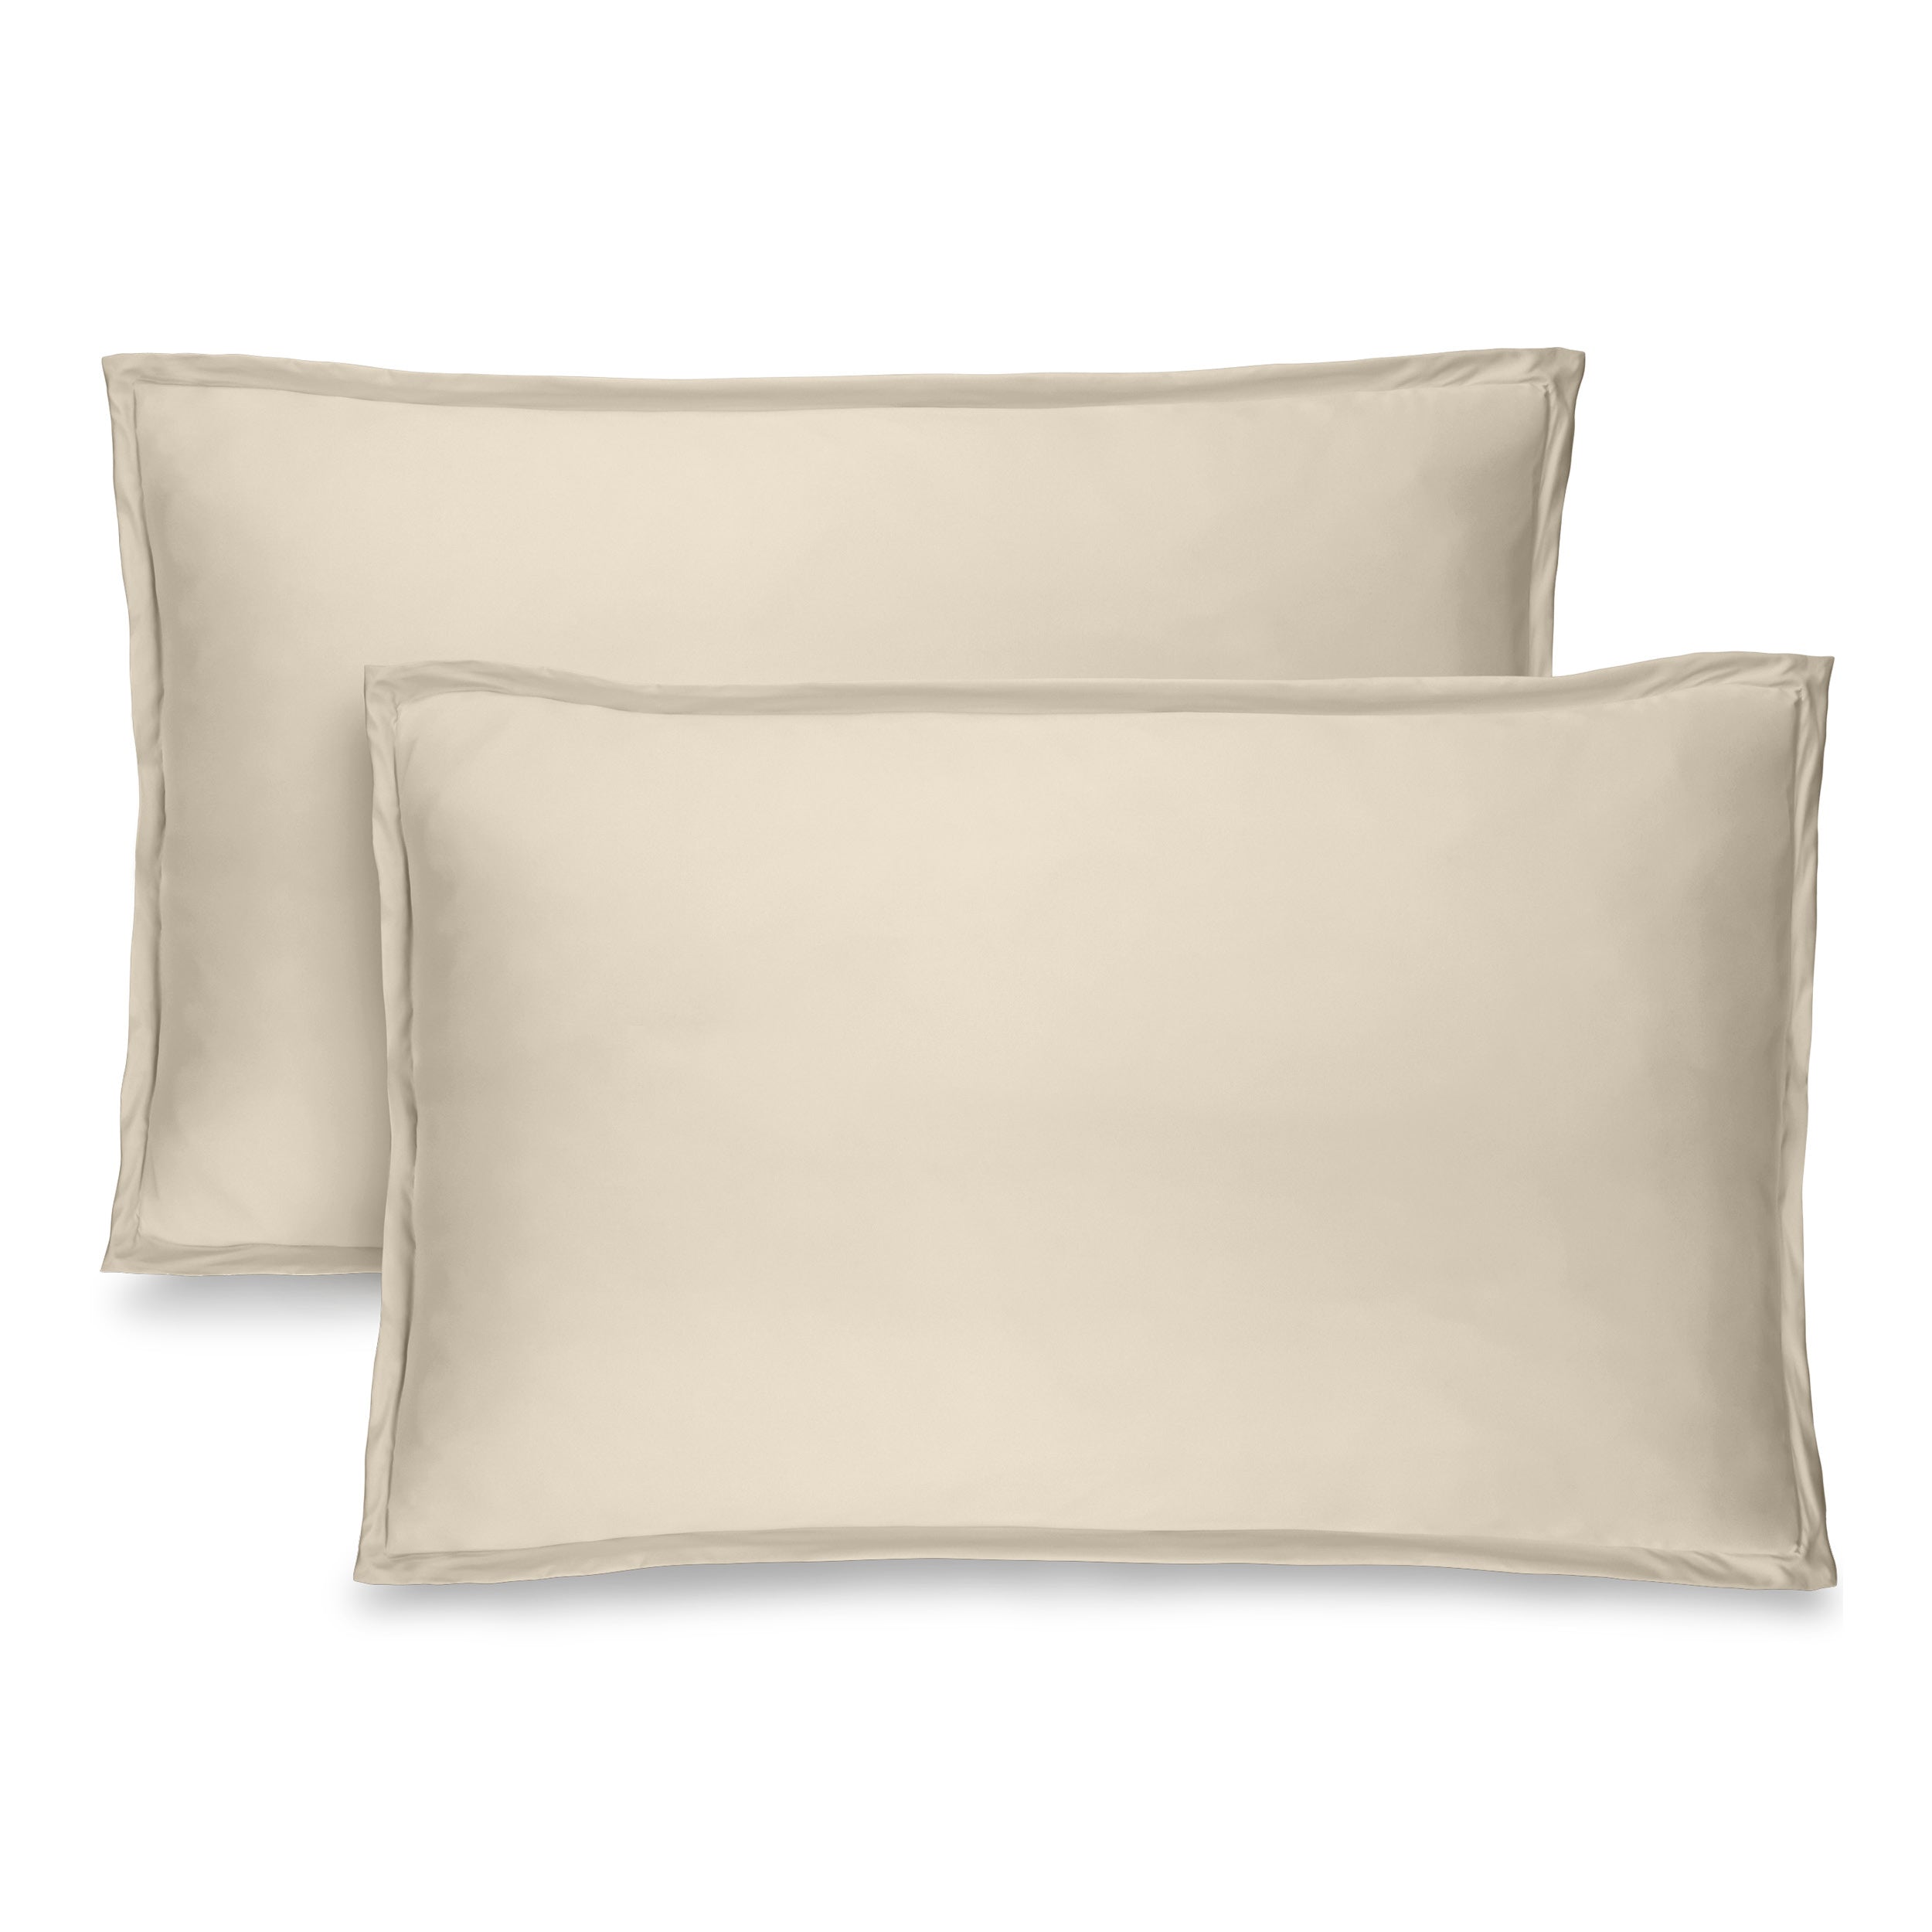 Two sand pillow shams on pillows standing up with one behind the other